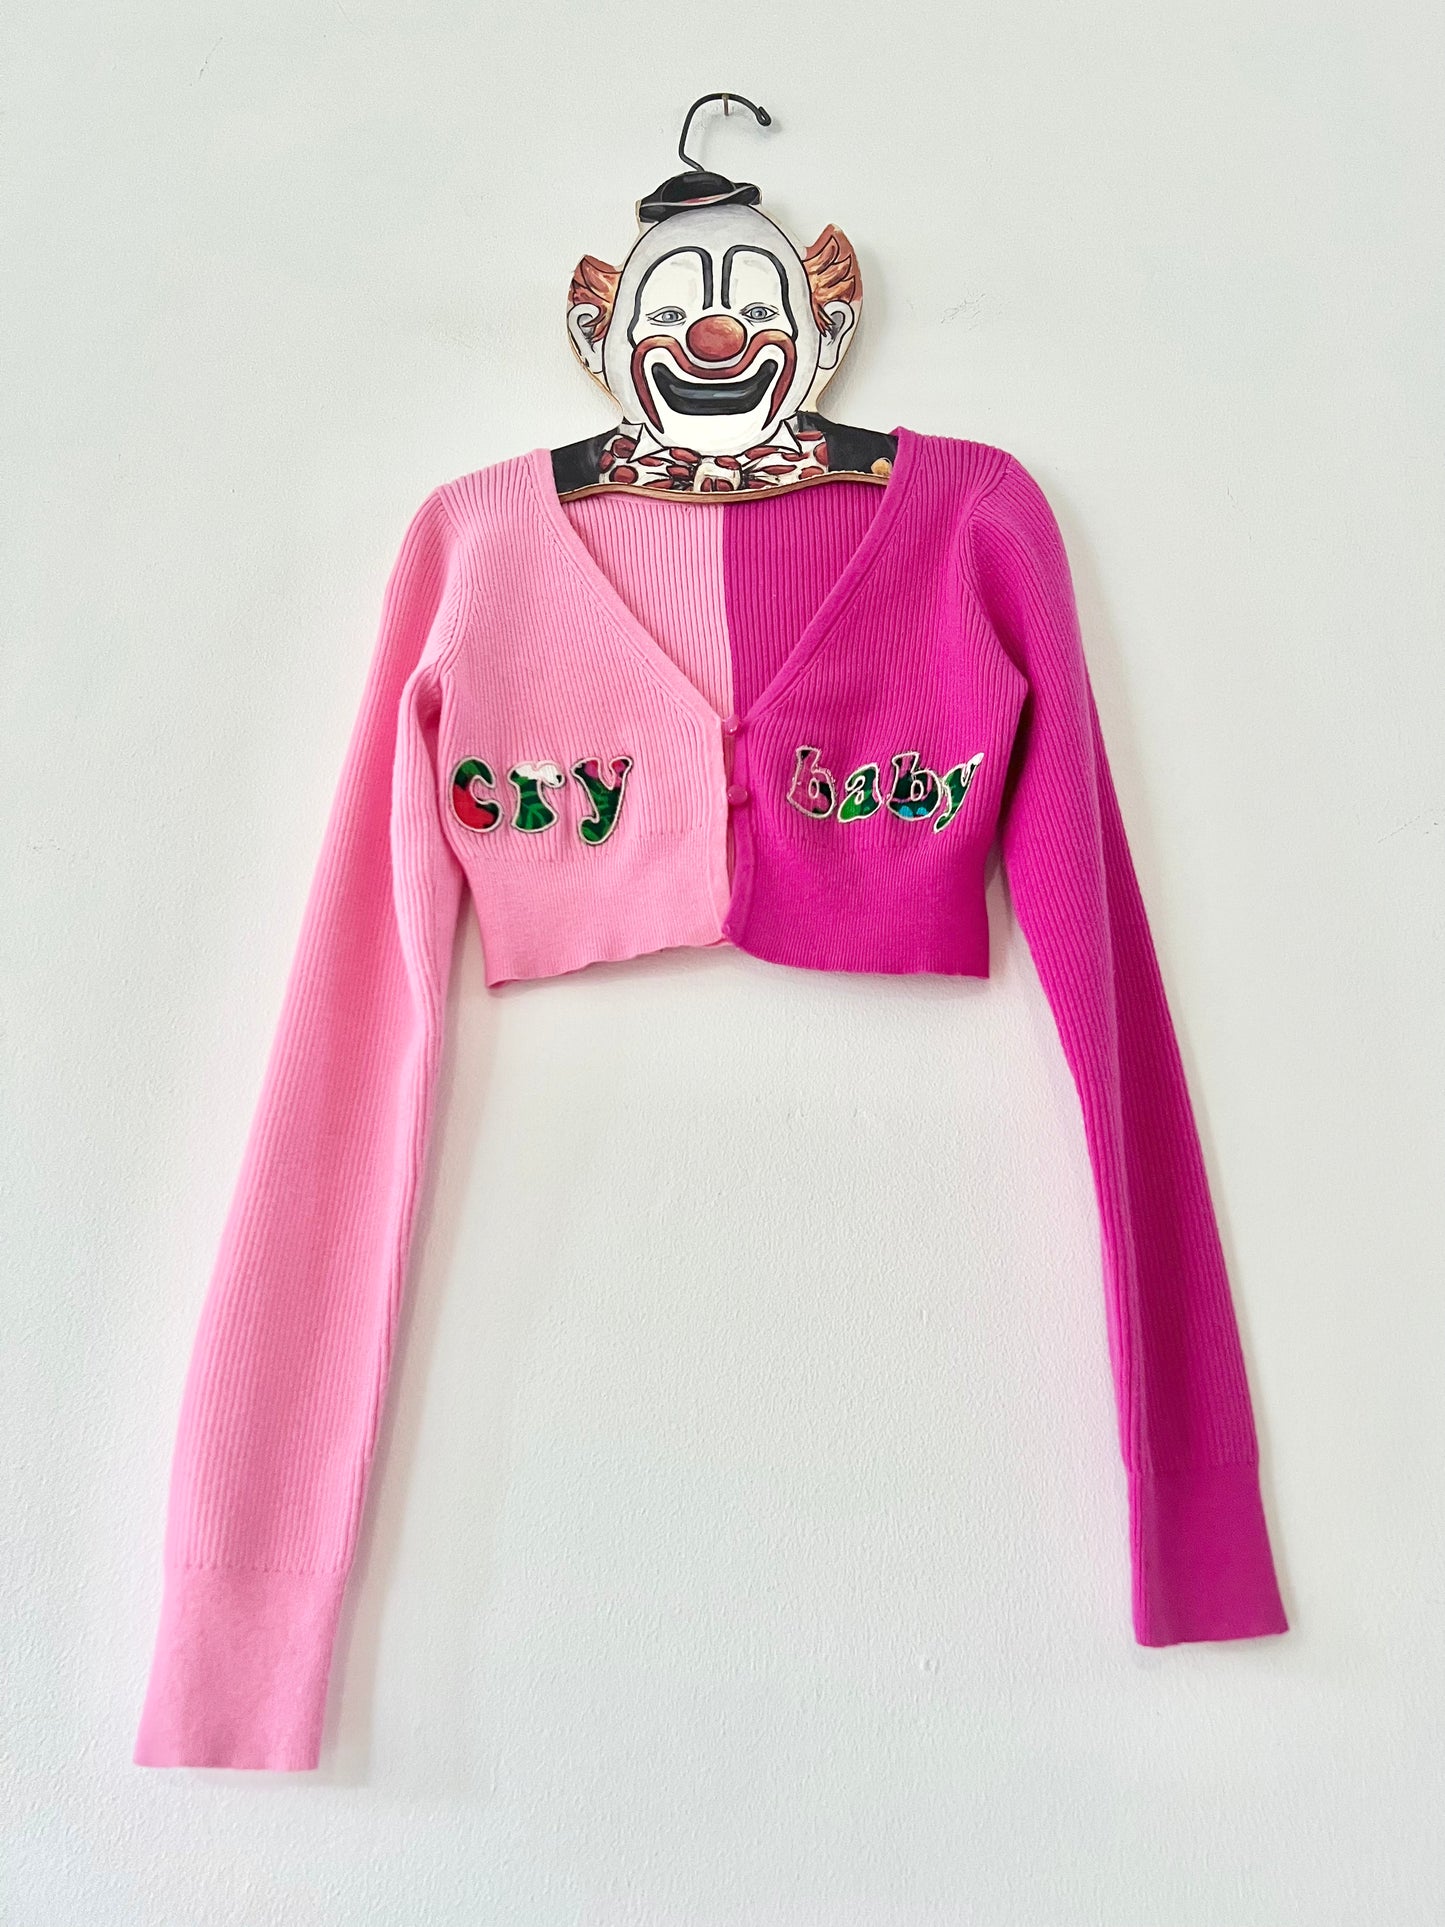 Cry Baby Appliqué Cropped Cardigan XS/S